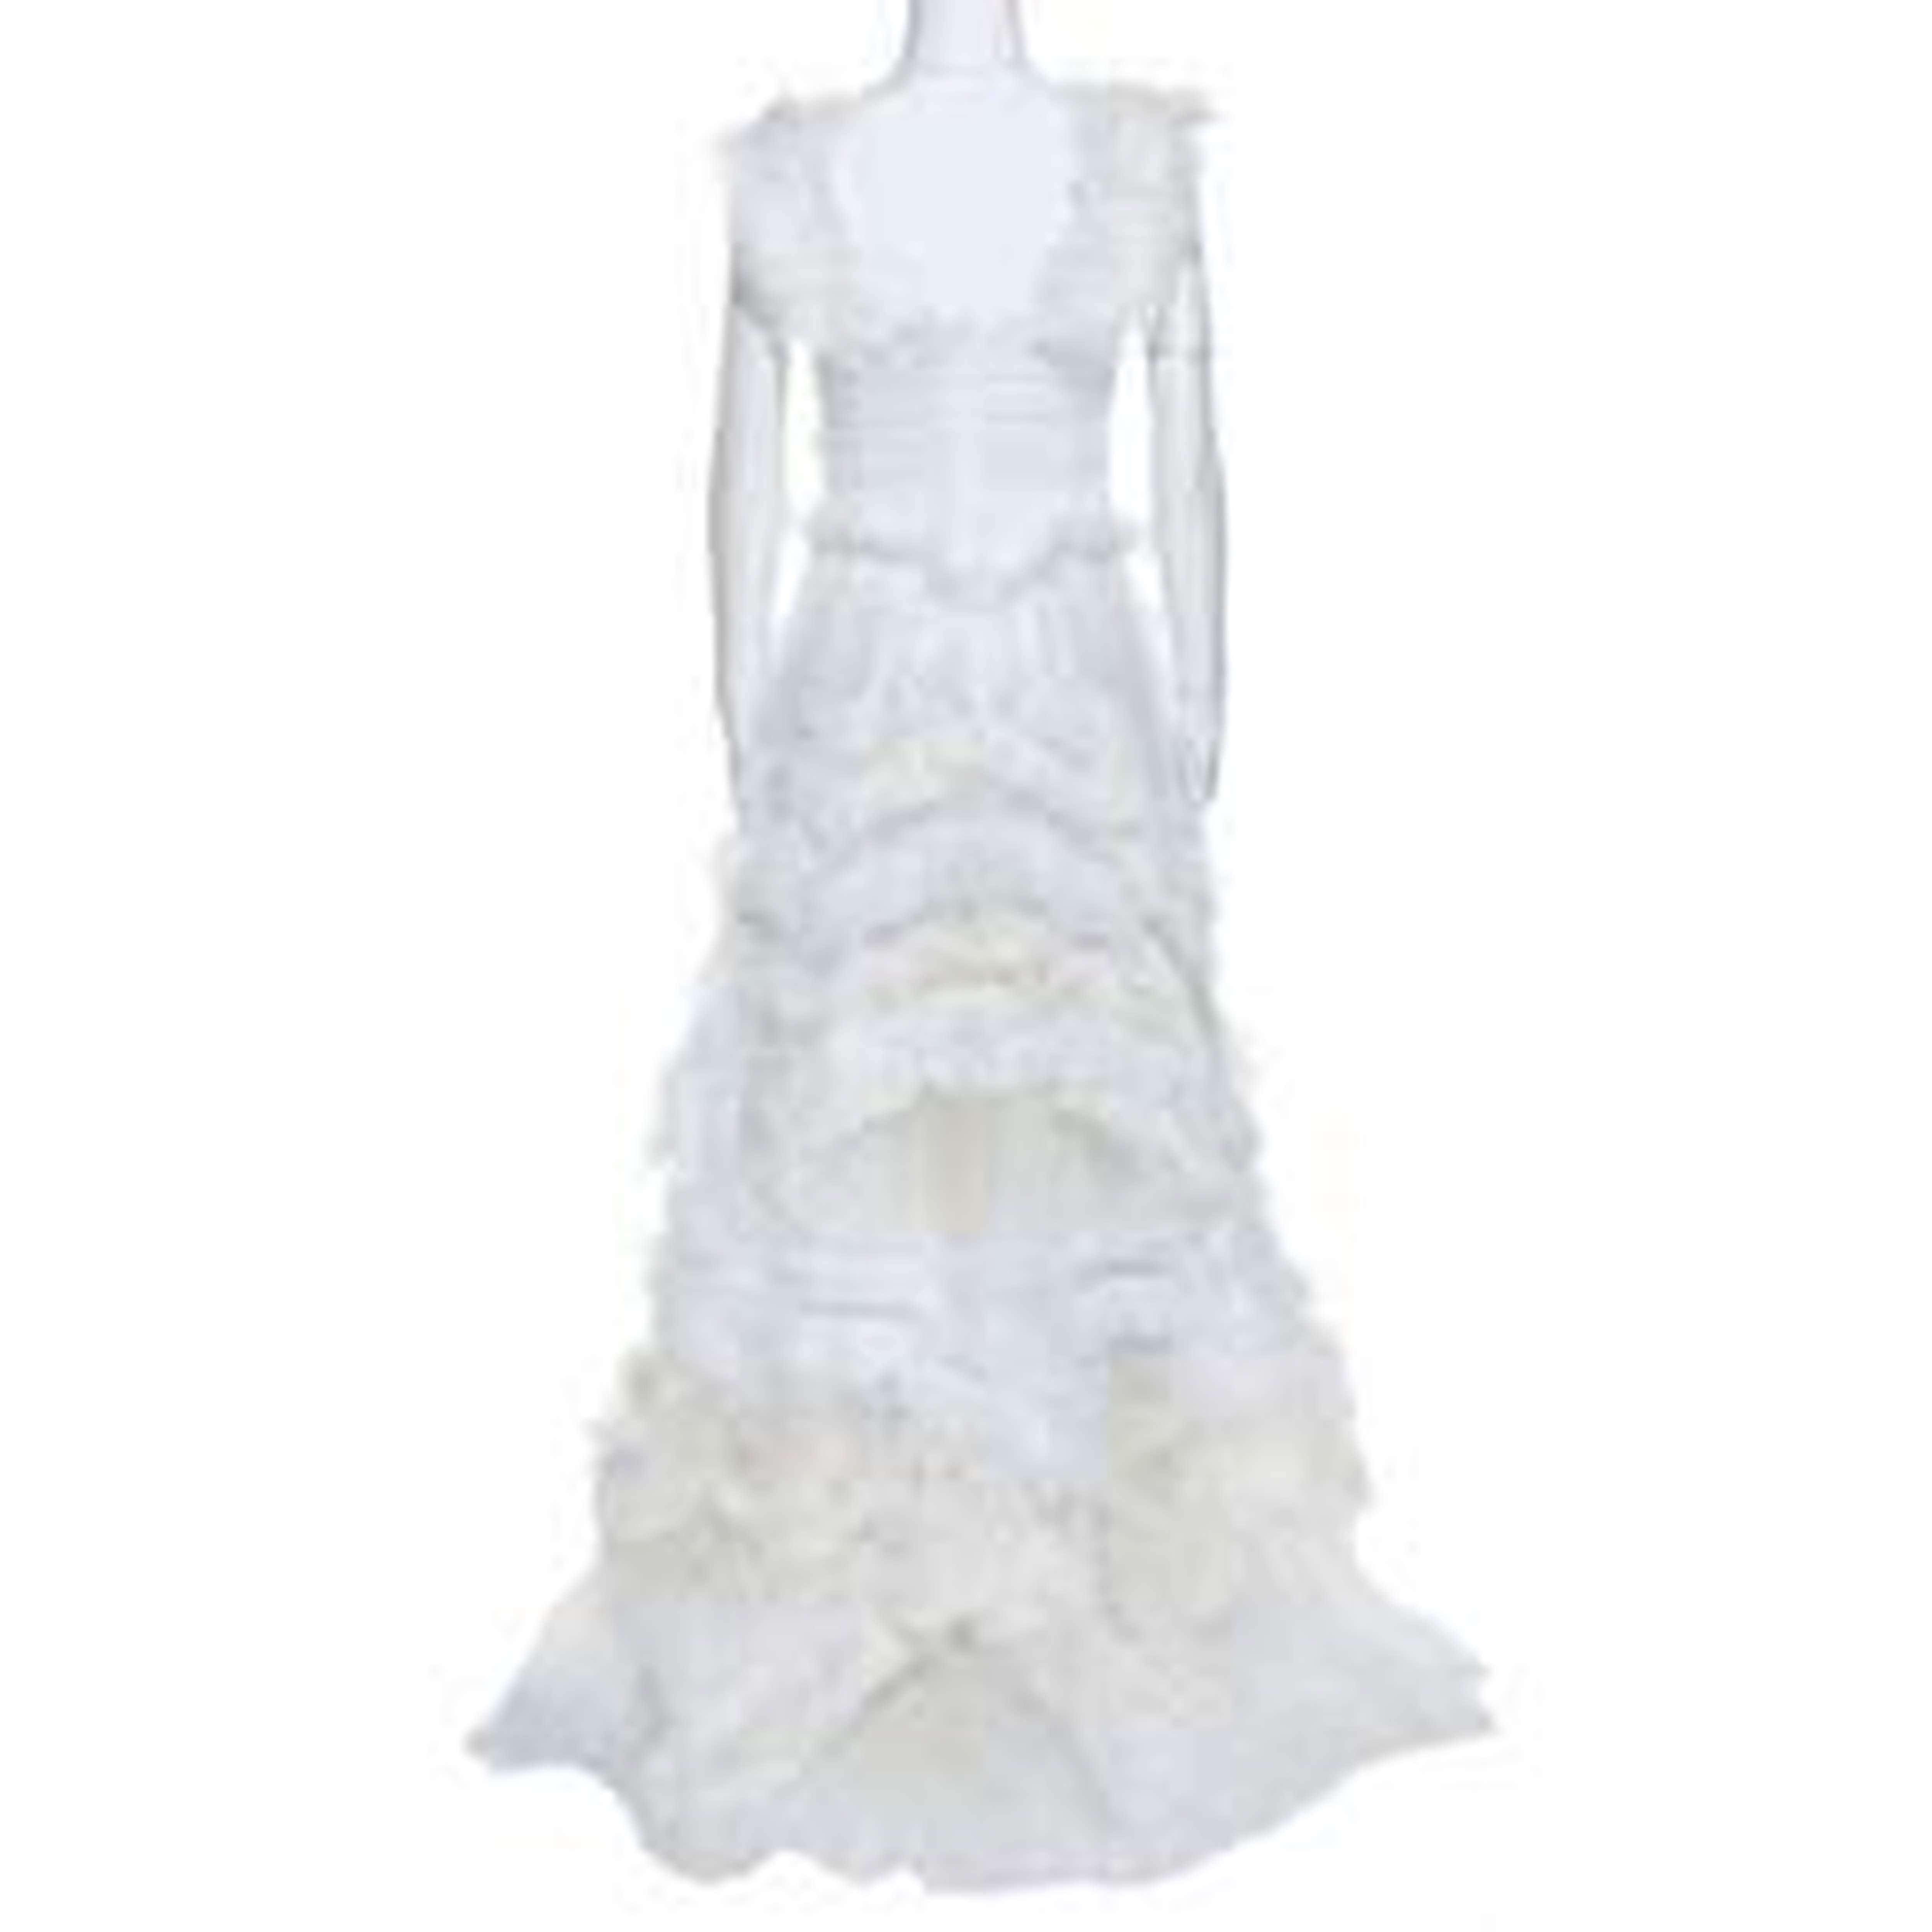 To help you float through evenings as beautifully as clouds gliding through the sky, Dolce & Gabbana created this gown for you. It is a marvellous design, achieved by assembling feather trims and ruffle details on soft fabrics and then sewing it